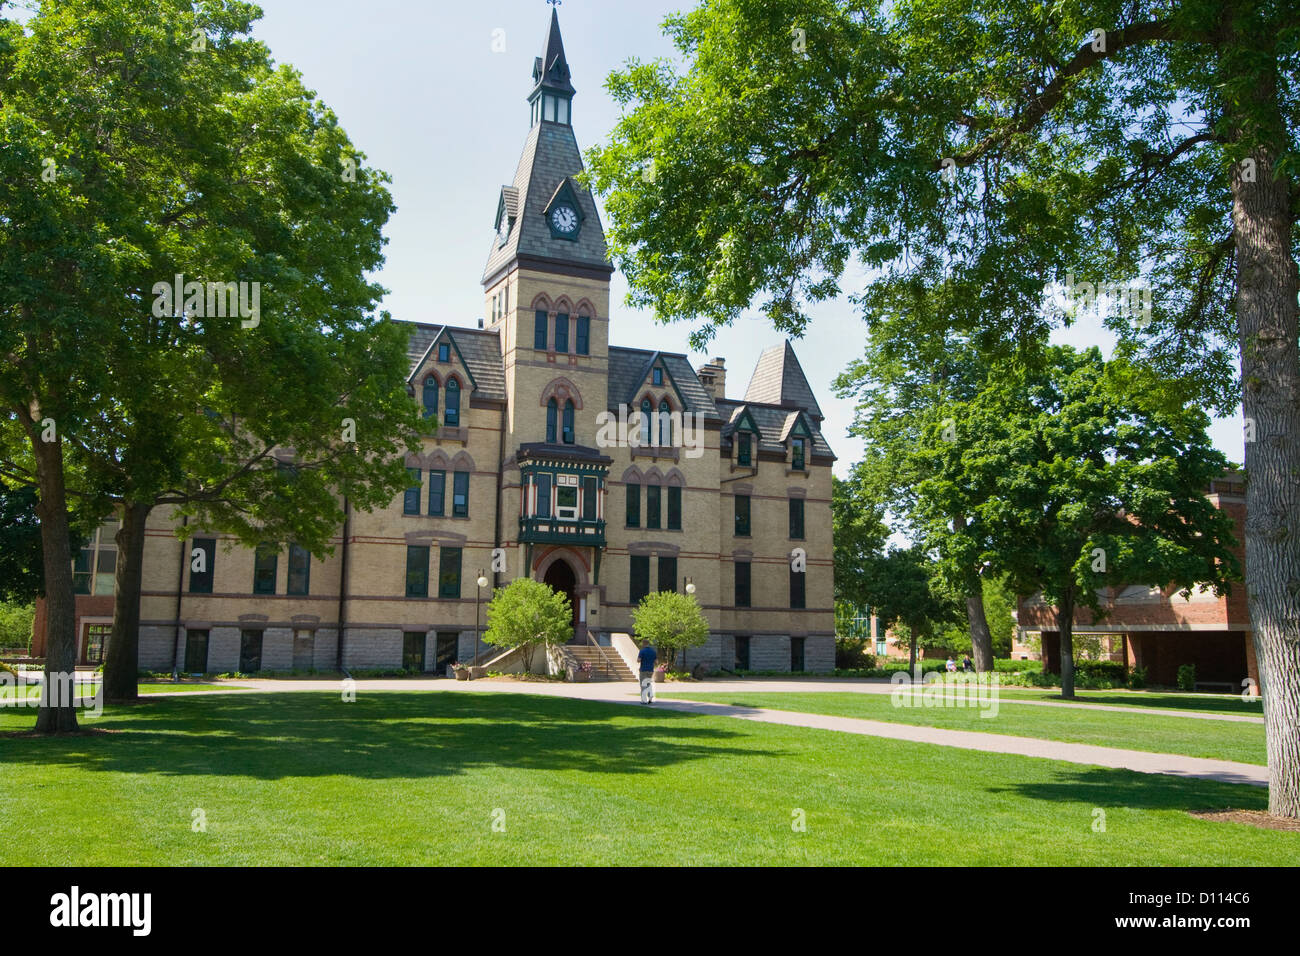 Hamline University Old Main administration building on the National Register of Historic Places. St Paul Minnesota MN USA Stock Photo